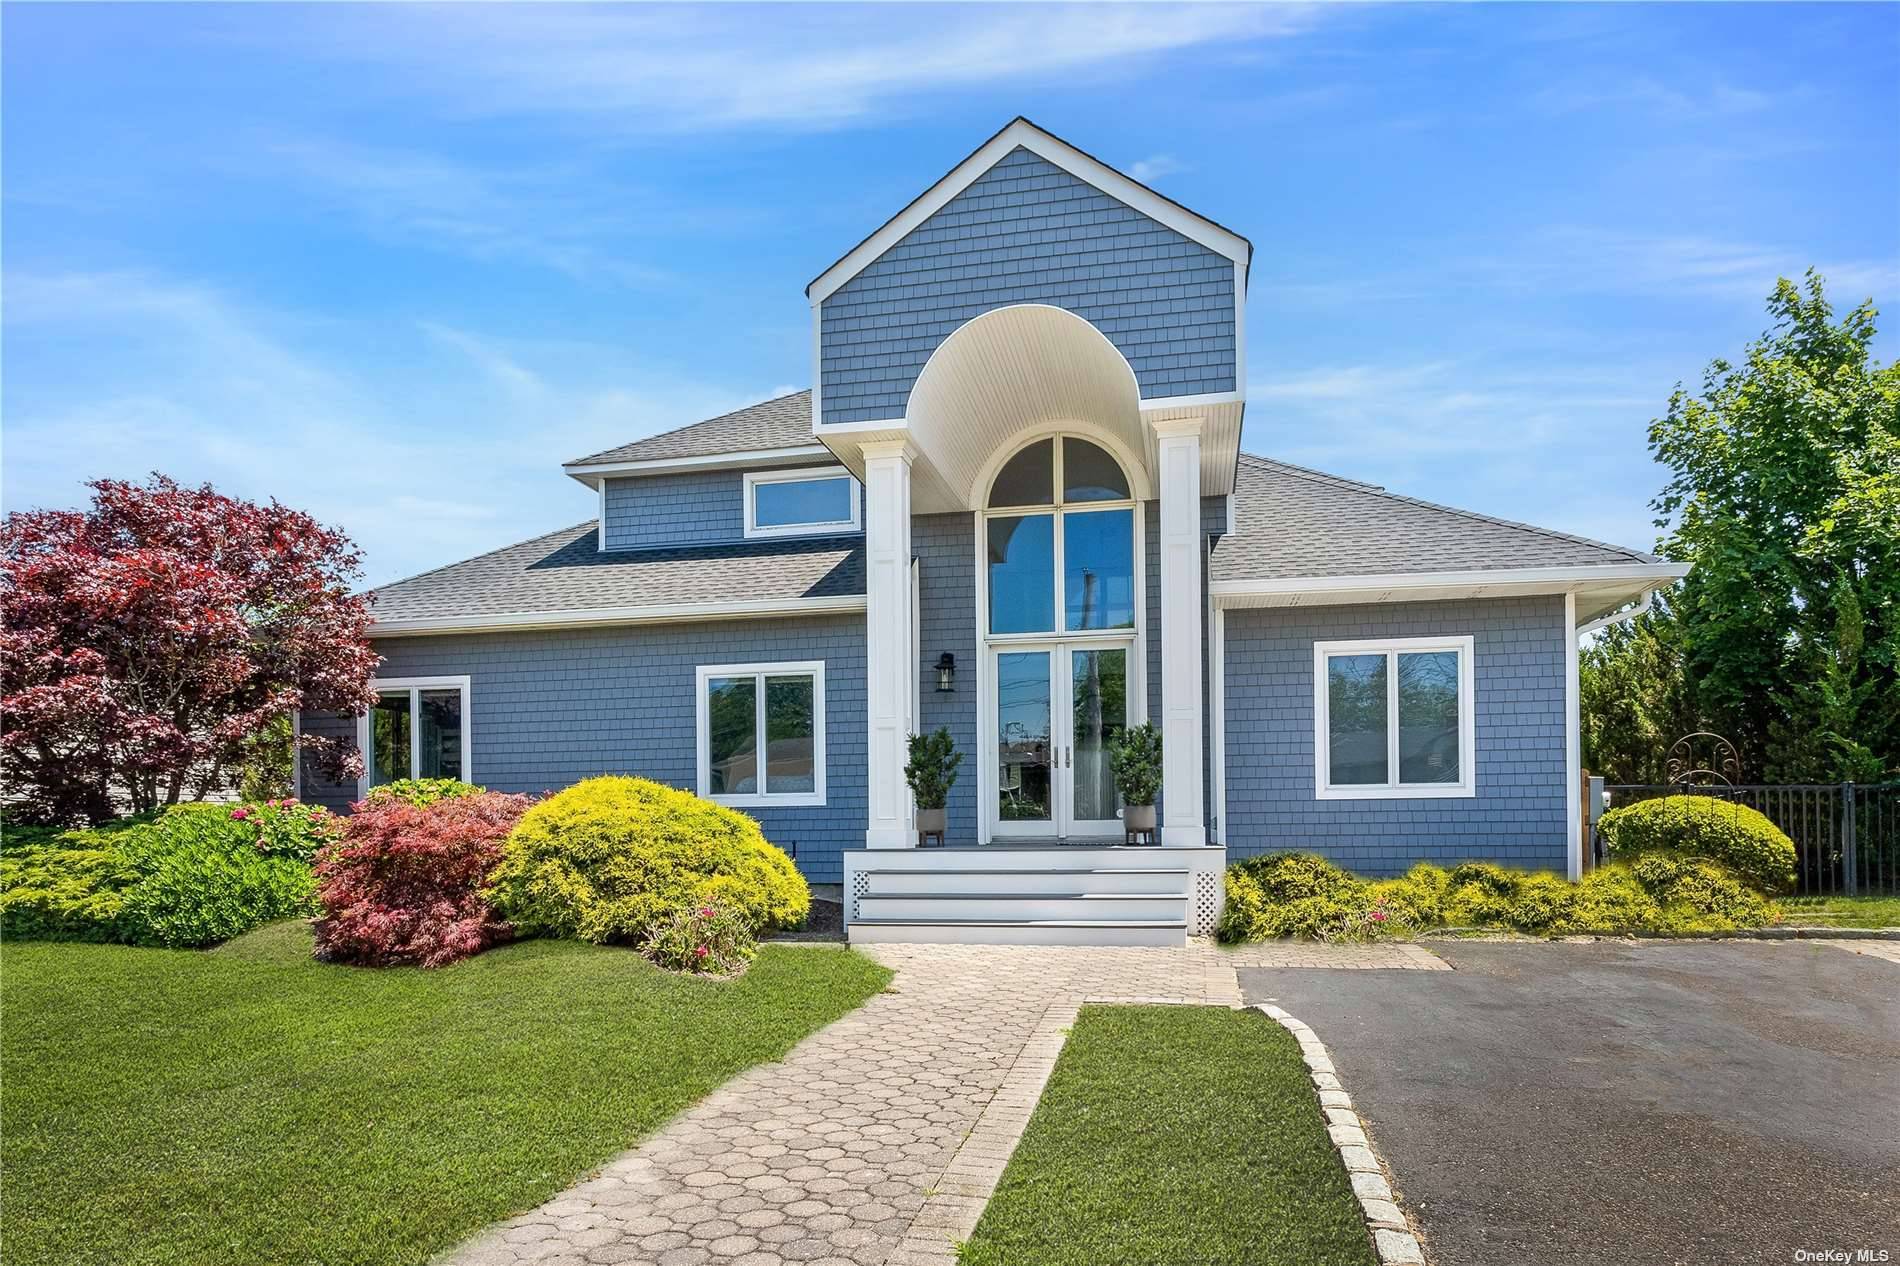 Located in the highly desirable Shinnecock Shores Community, this totally renovated post modern home has everything you could possibly want, including a private sandy beach.